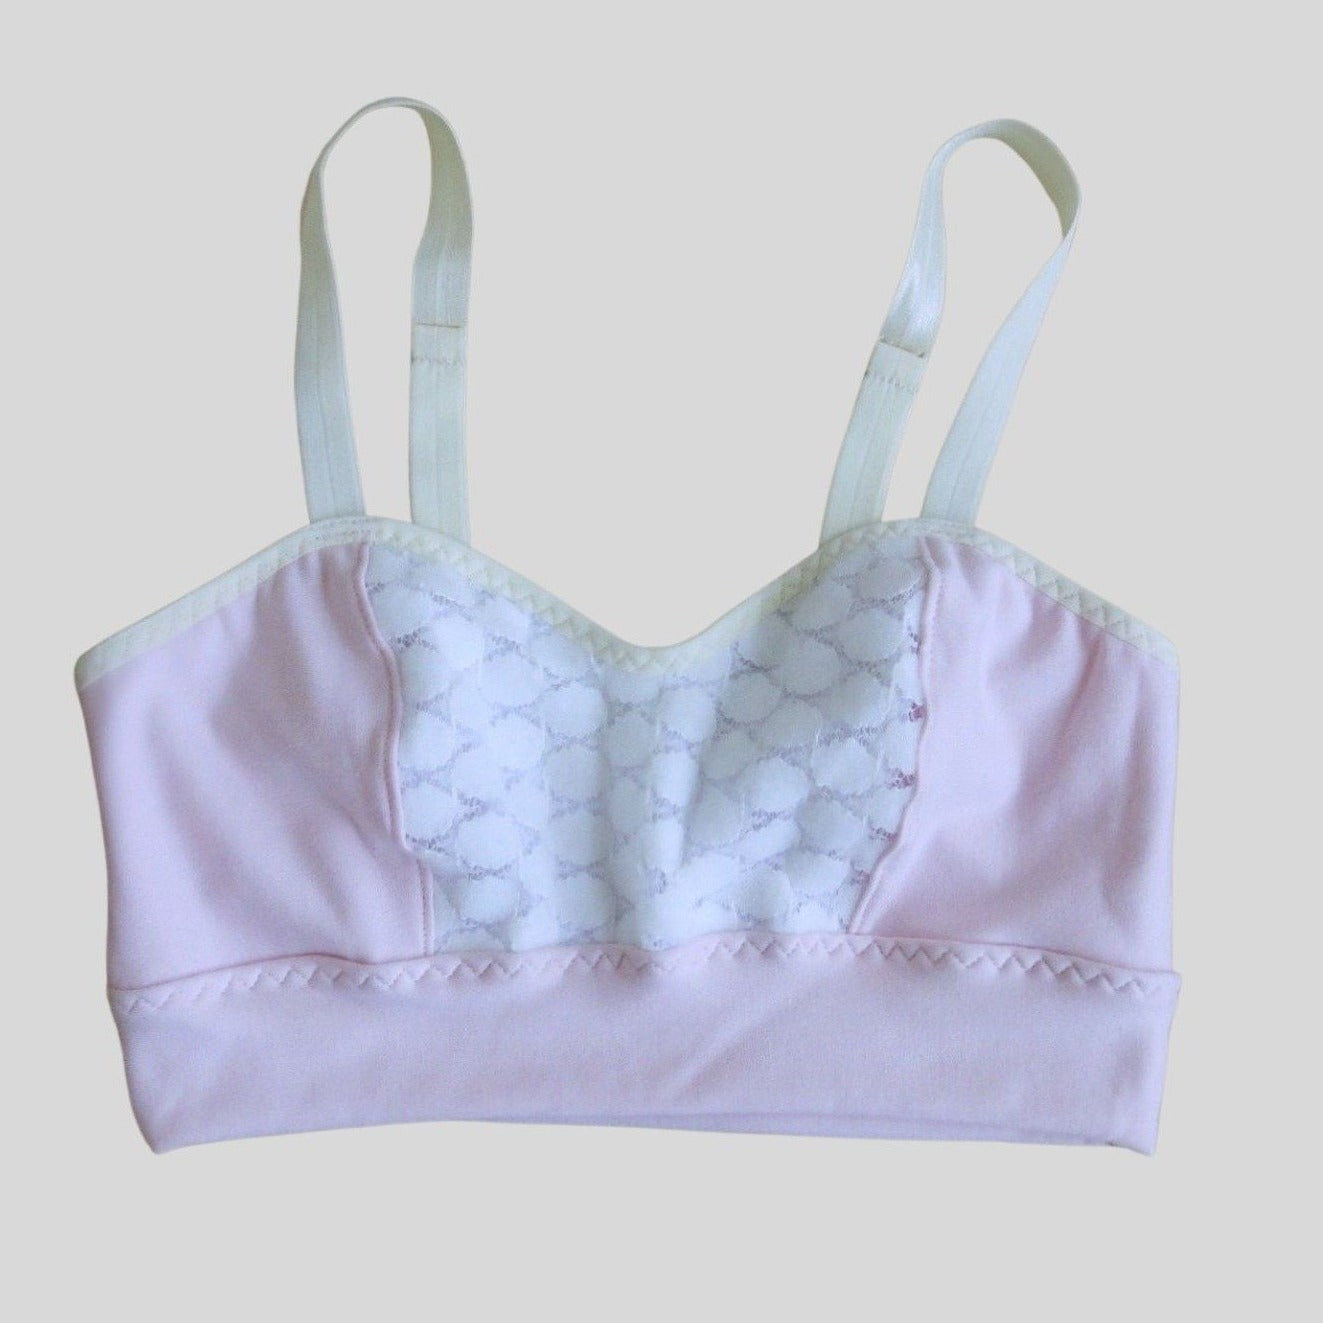 Long bralette top with mesh insert